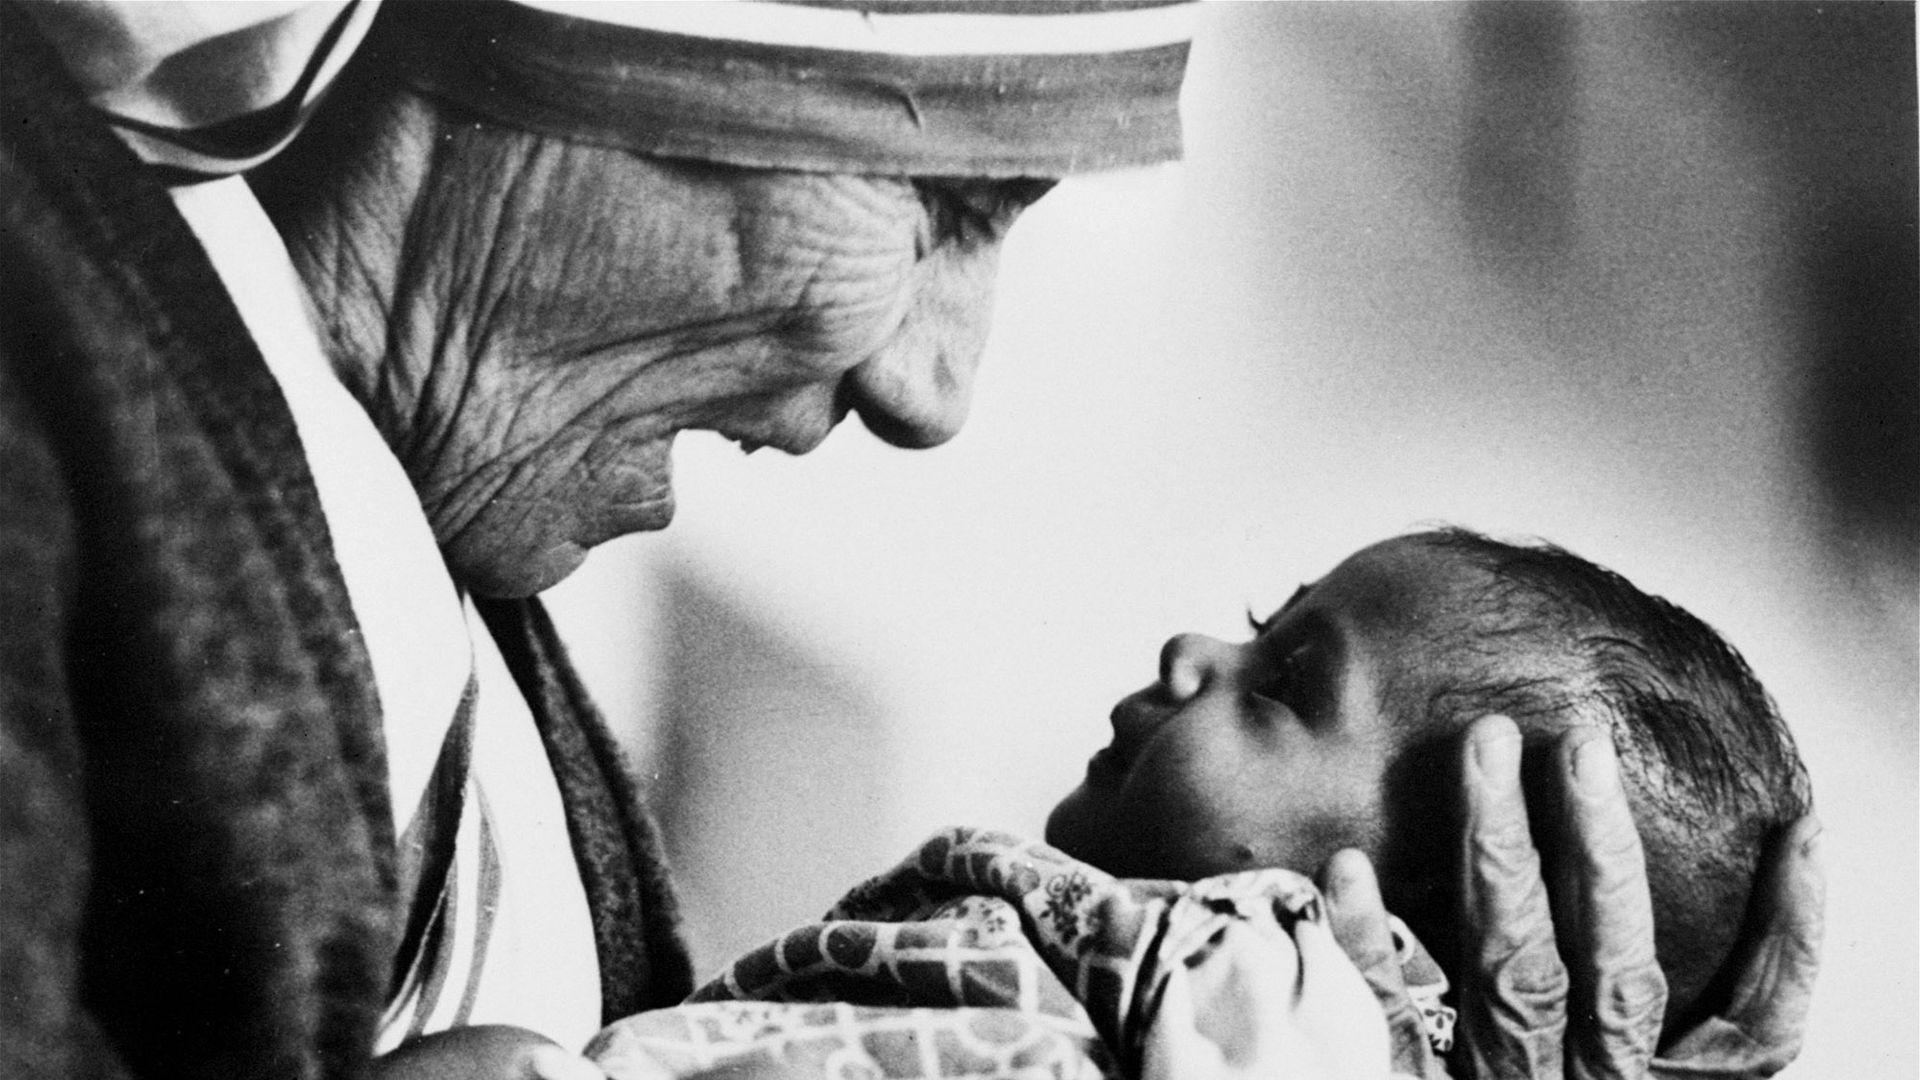 Mother Teresa officially becomes a saint, canonized